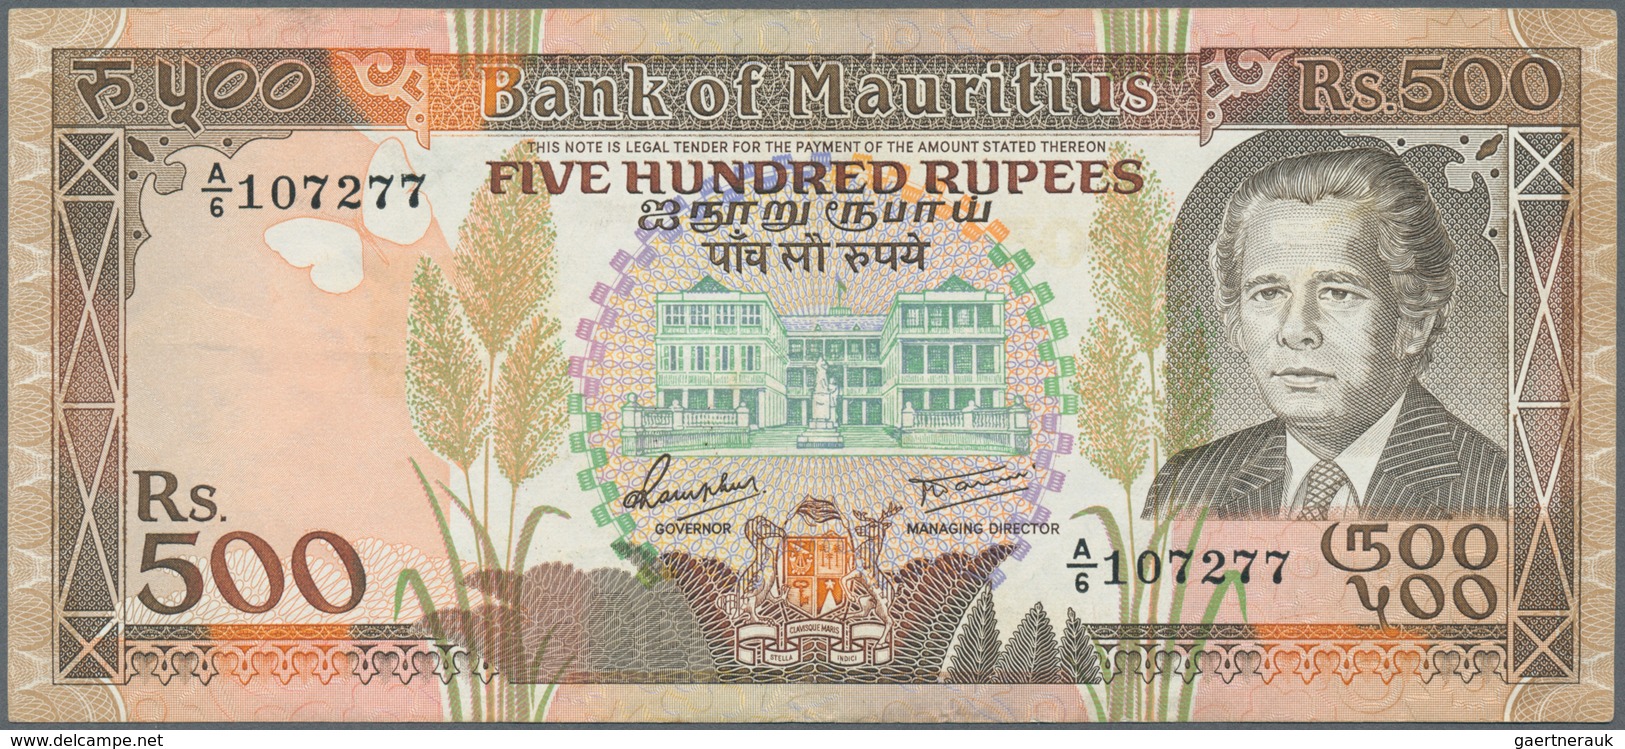 Mauritius: Pair With 500 Rupees ND(1988) P.40b (VF+) And 200 Rupees ND(1985) P.39 (UNC). (2 Pcs.) - Mauritius